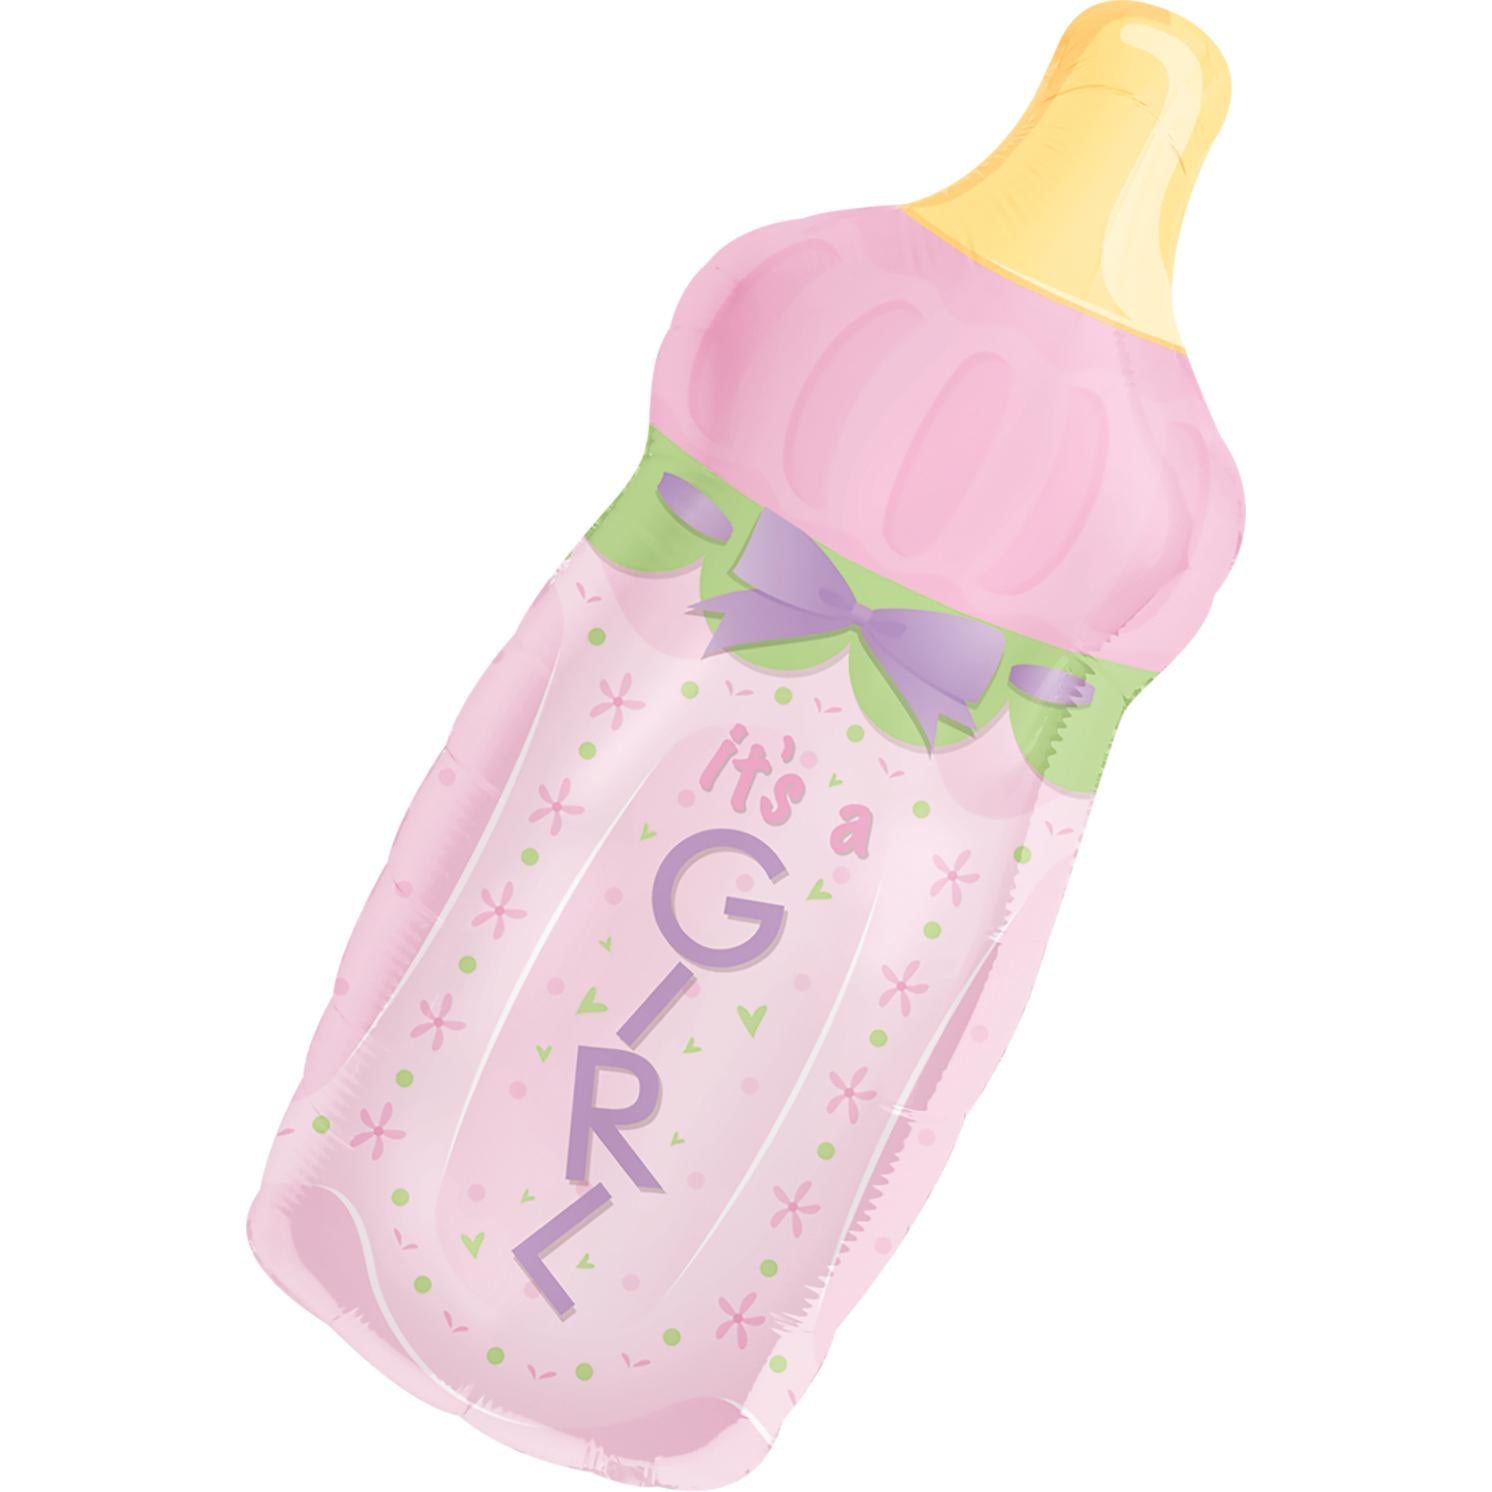 It's A Girl Baby Bottle Foil Balloon 13 x 31in Balloons & Streamers - Party Centre